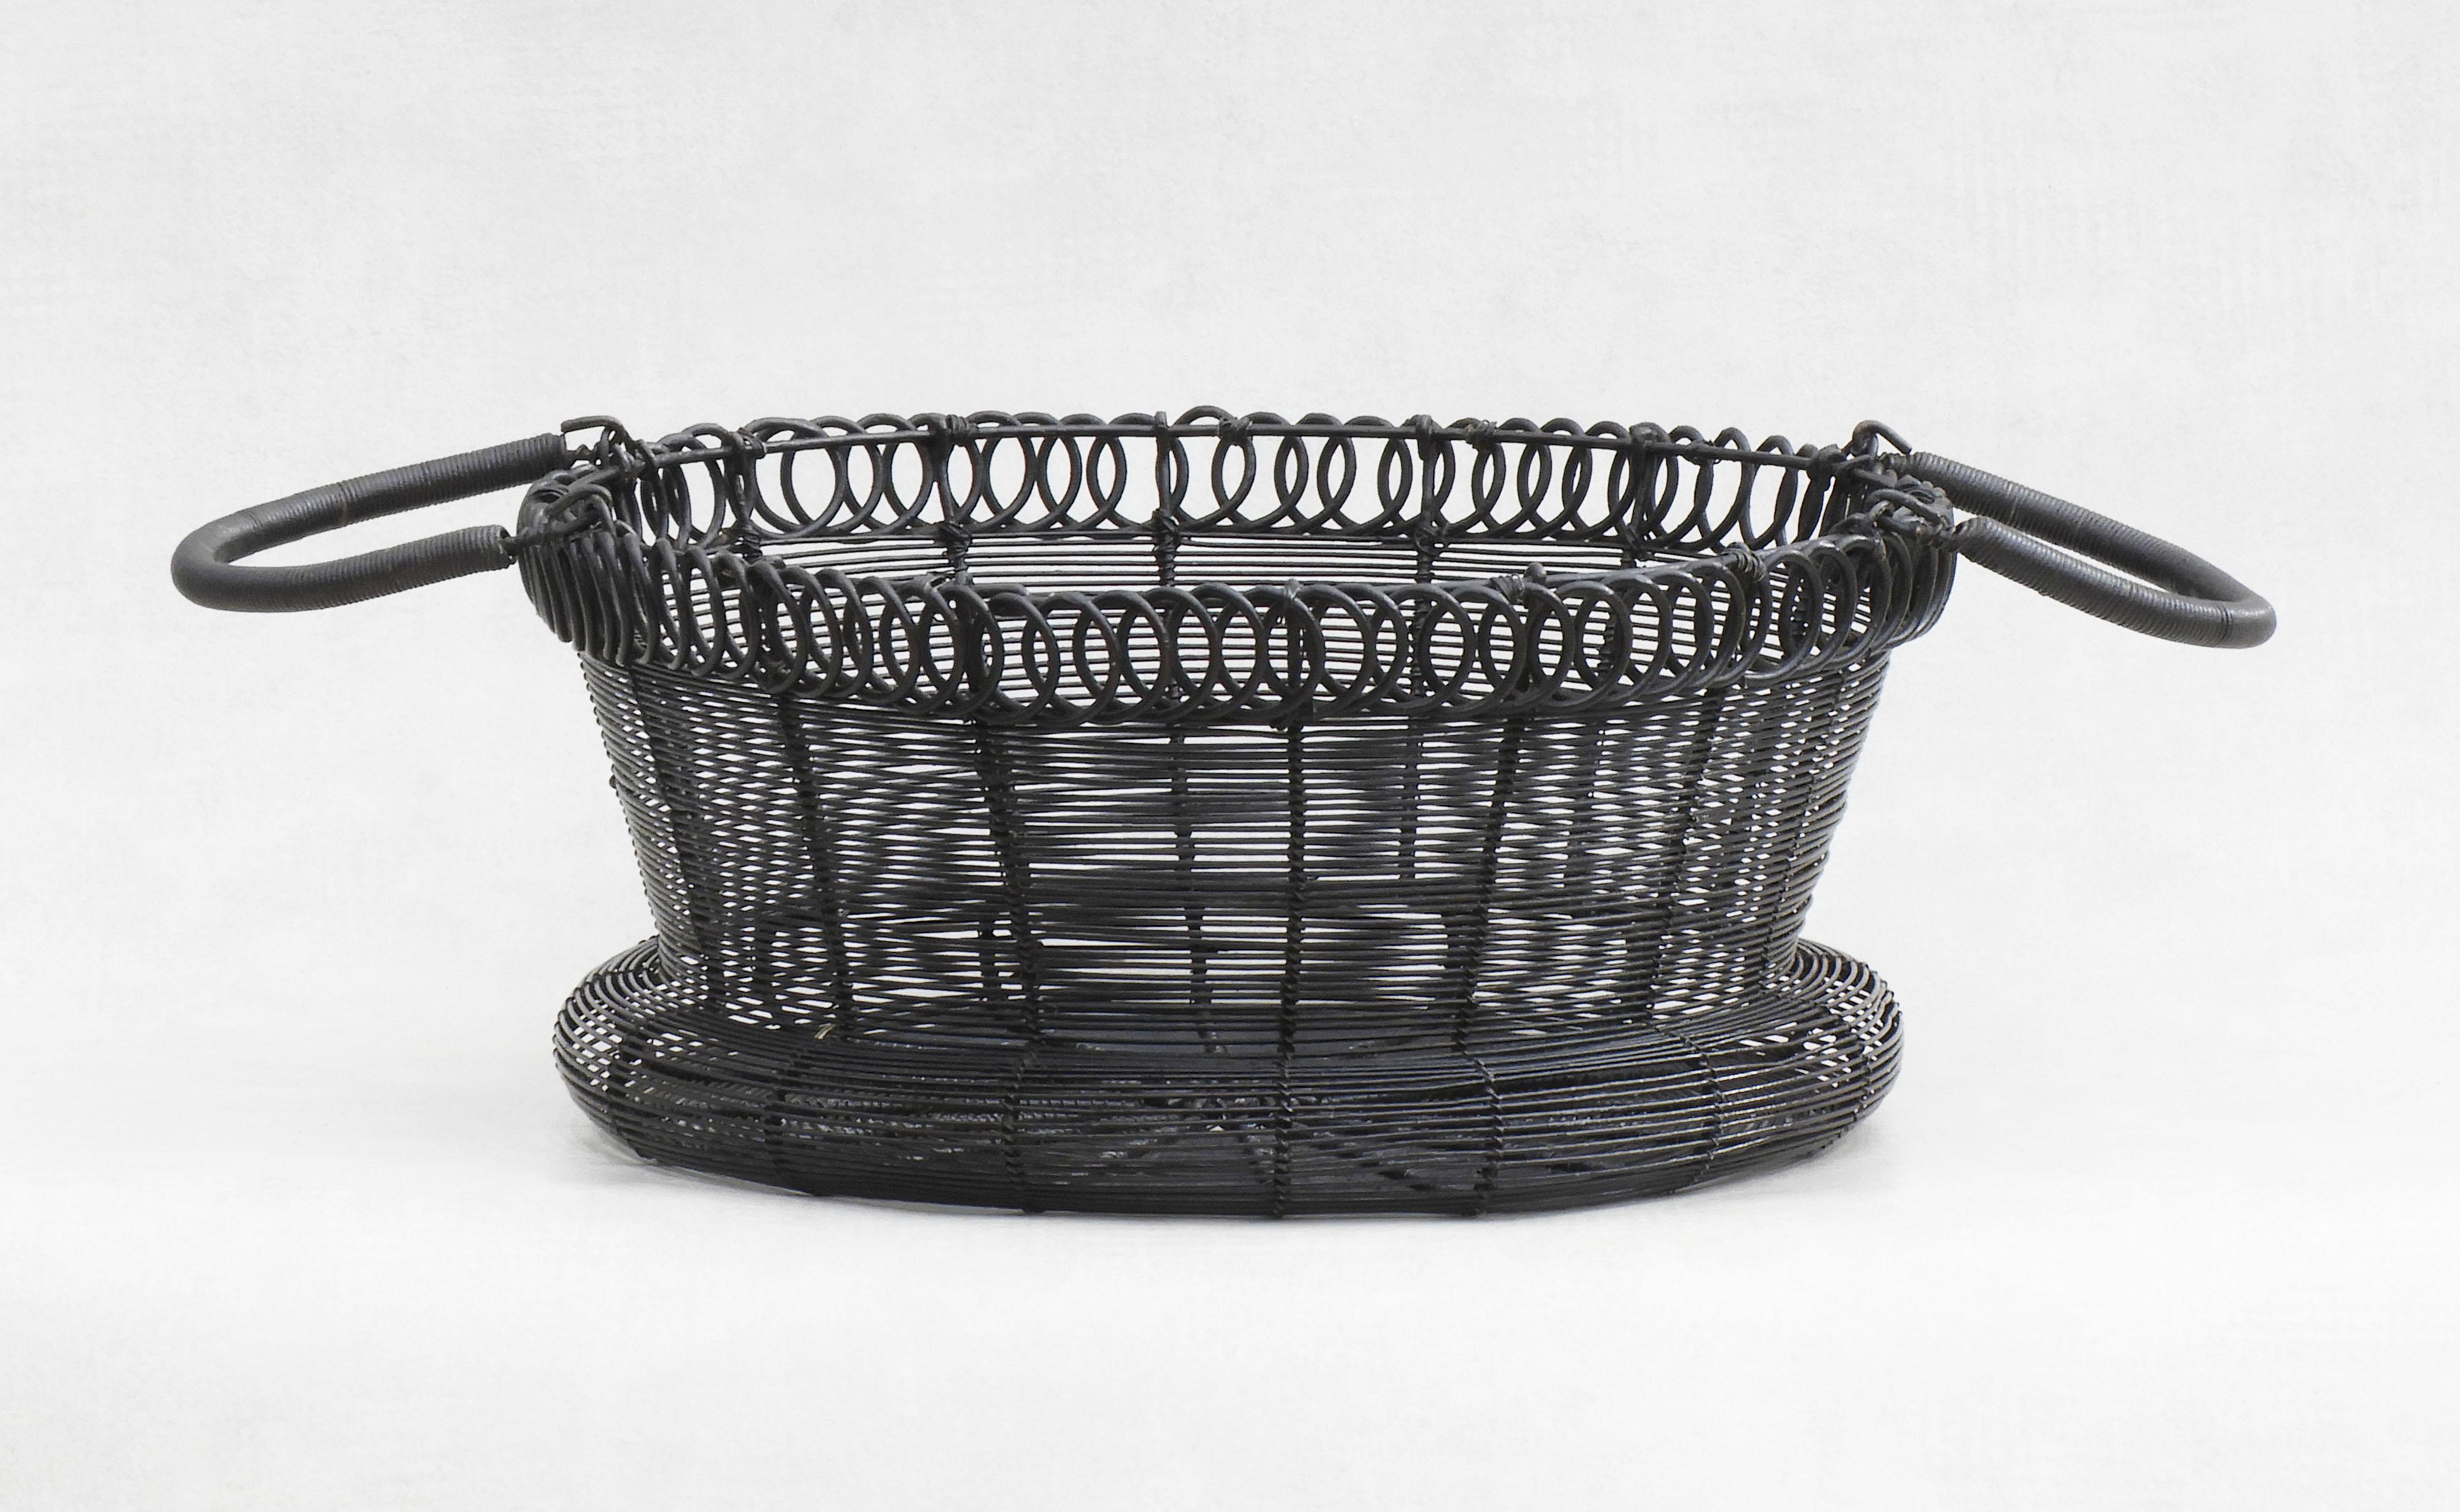 Charming handcrafted Provincial French woven wire work basket, circa 1900. A well-executed nicely shaped 'pannier' with moveable handles and decorative looped edge. Stylish and practical this flat-bottomed basket is perfect for display or storage,